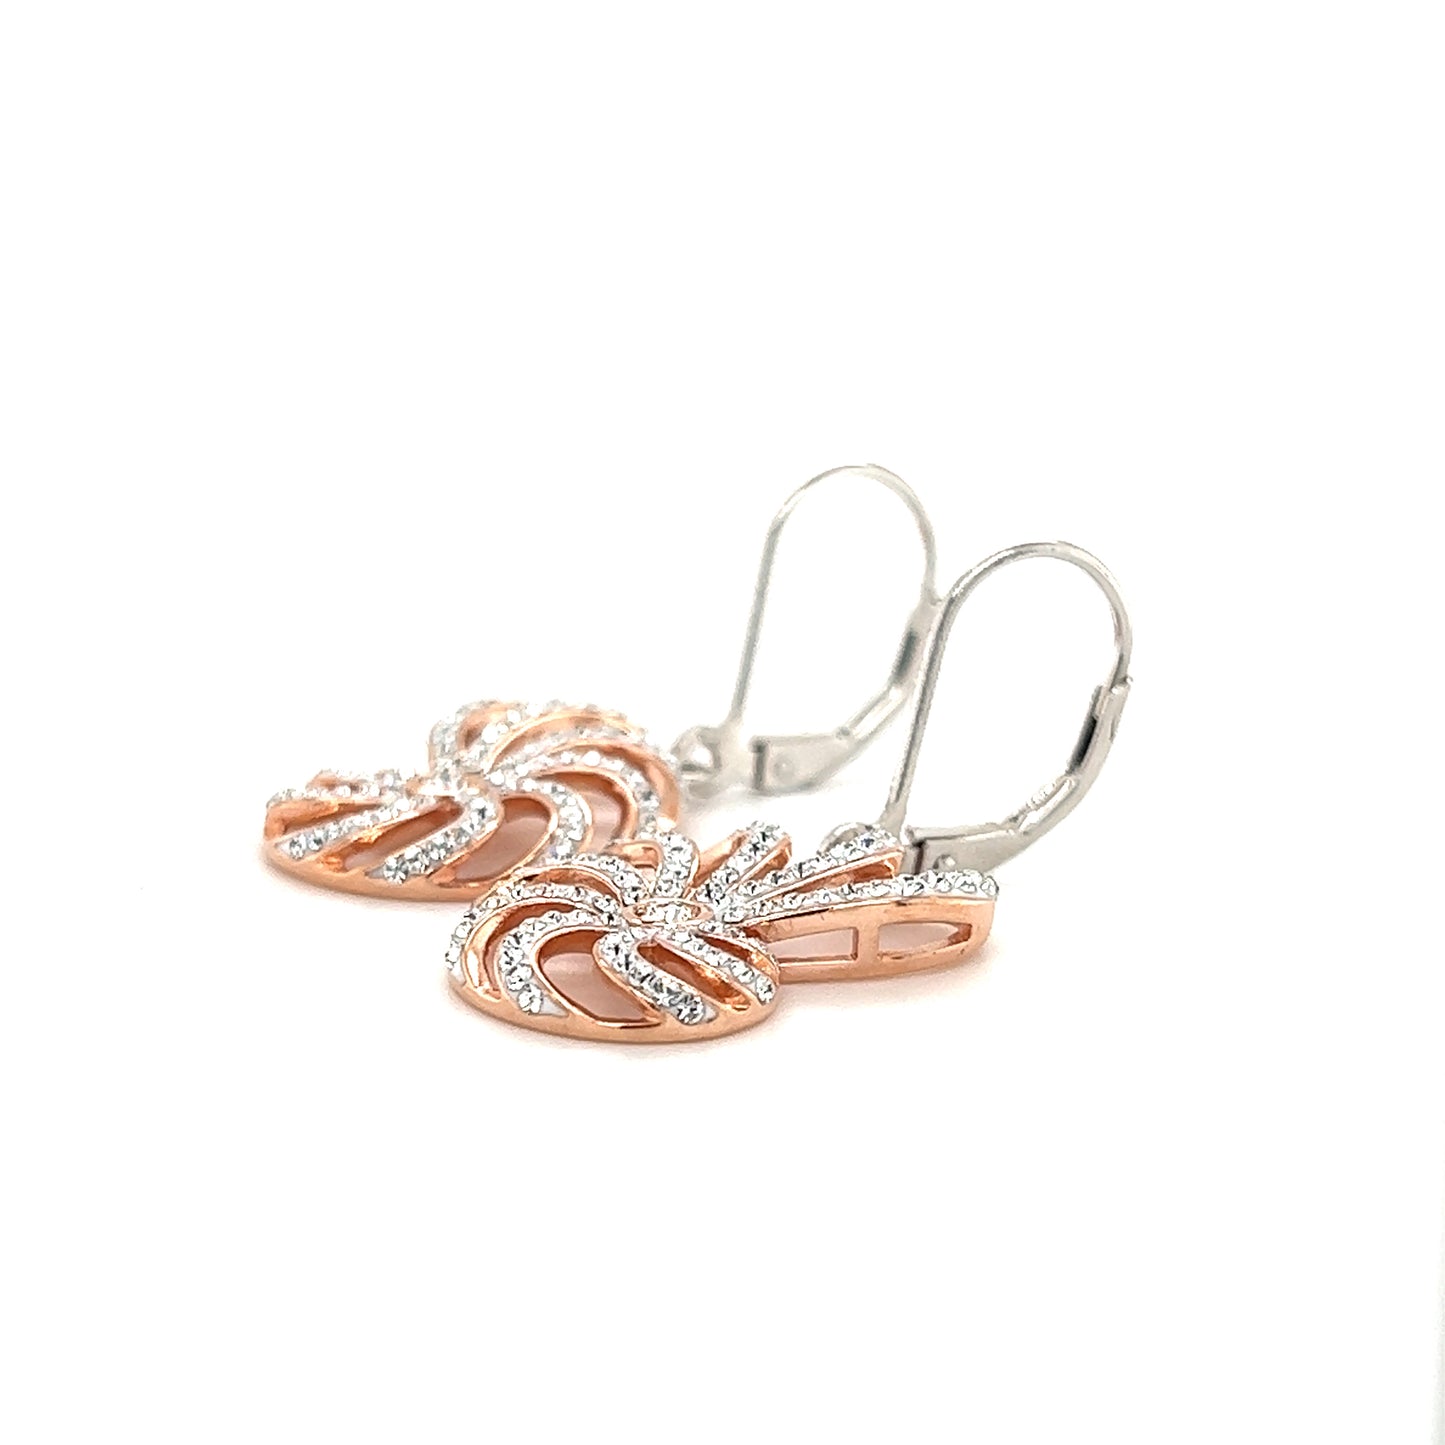 Nautilus Shell Dangle Earrings with Rose Gold Plate and White Crystals in Sterling Silver Flat Right Side View